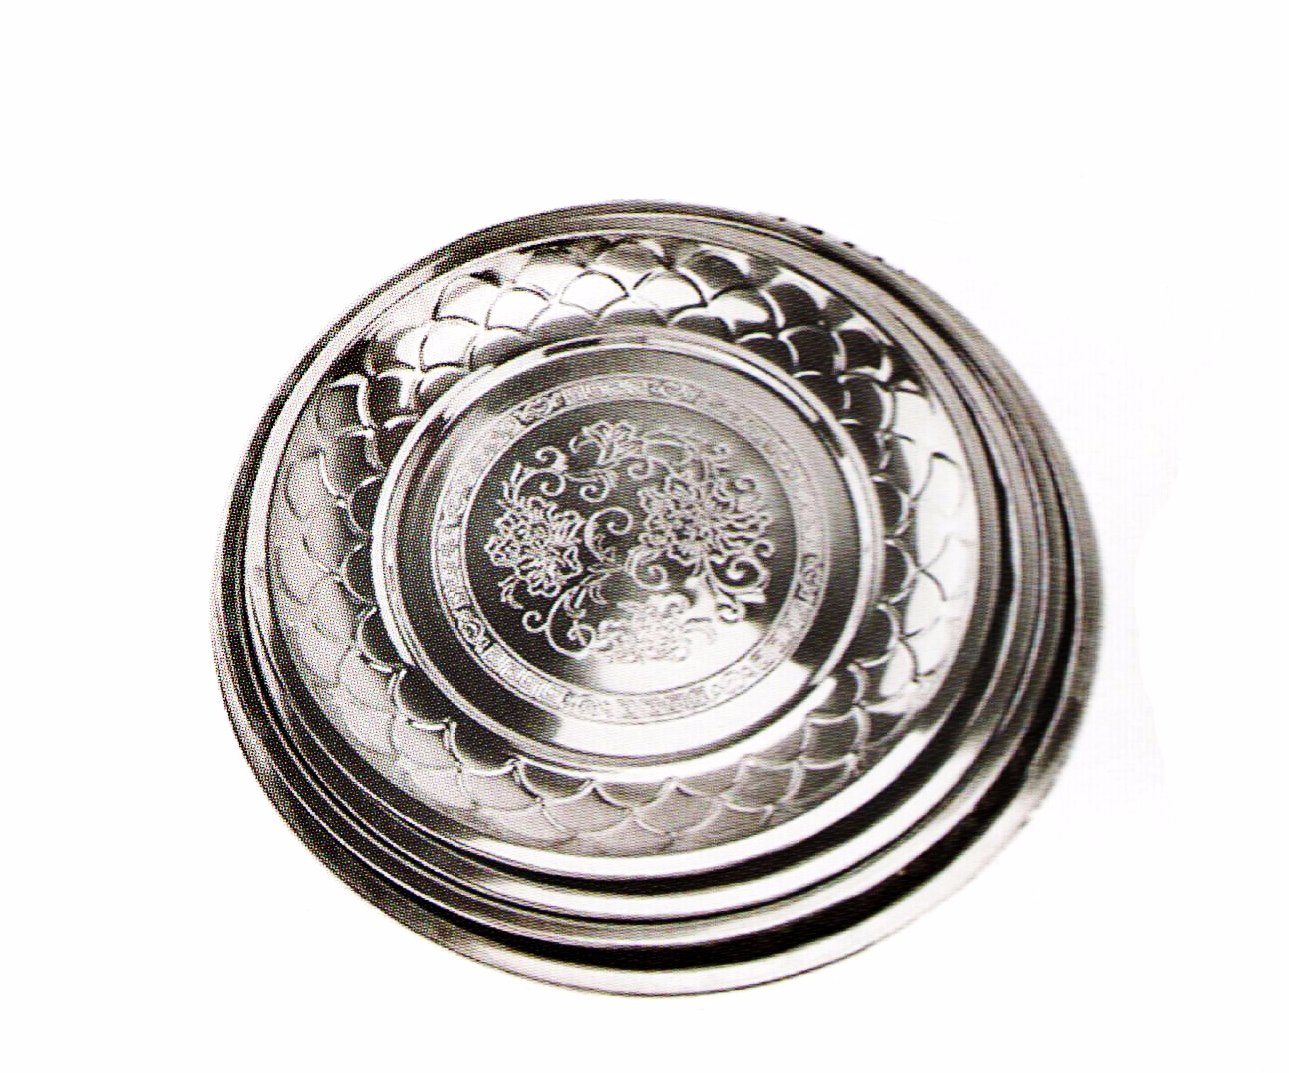 Newly Arrival Nature Wheat Lunch Box -
 Stainless Steel Kitchenware Decorative Pattern Round Tray Sp026 – Long Prosper